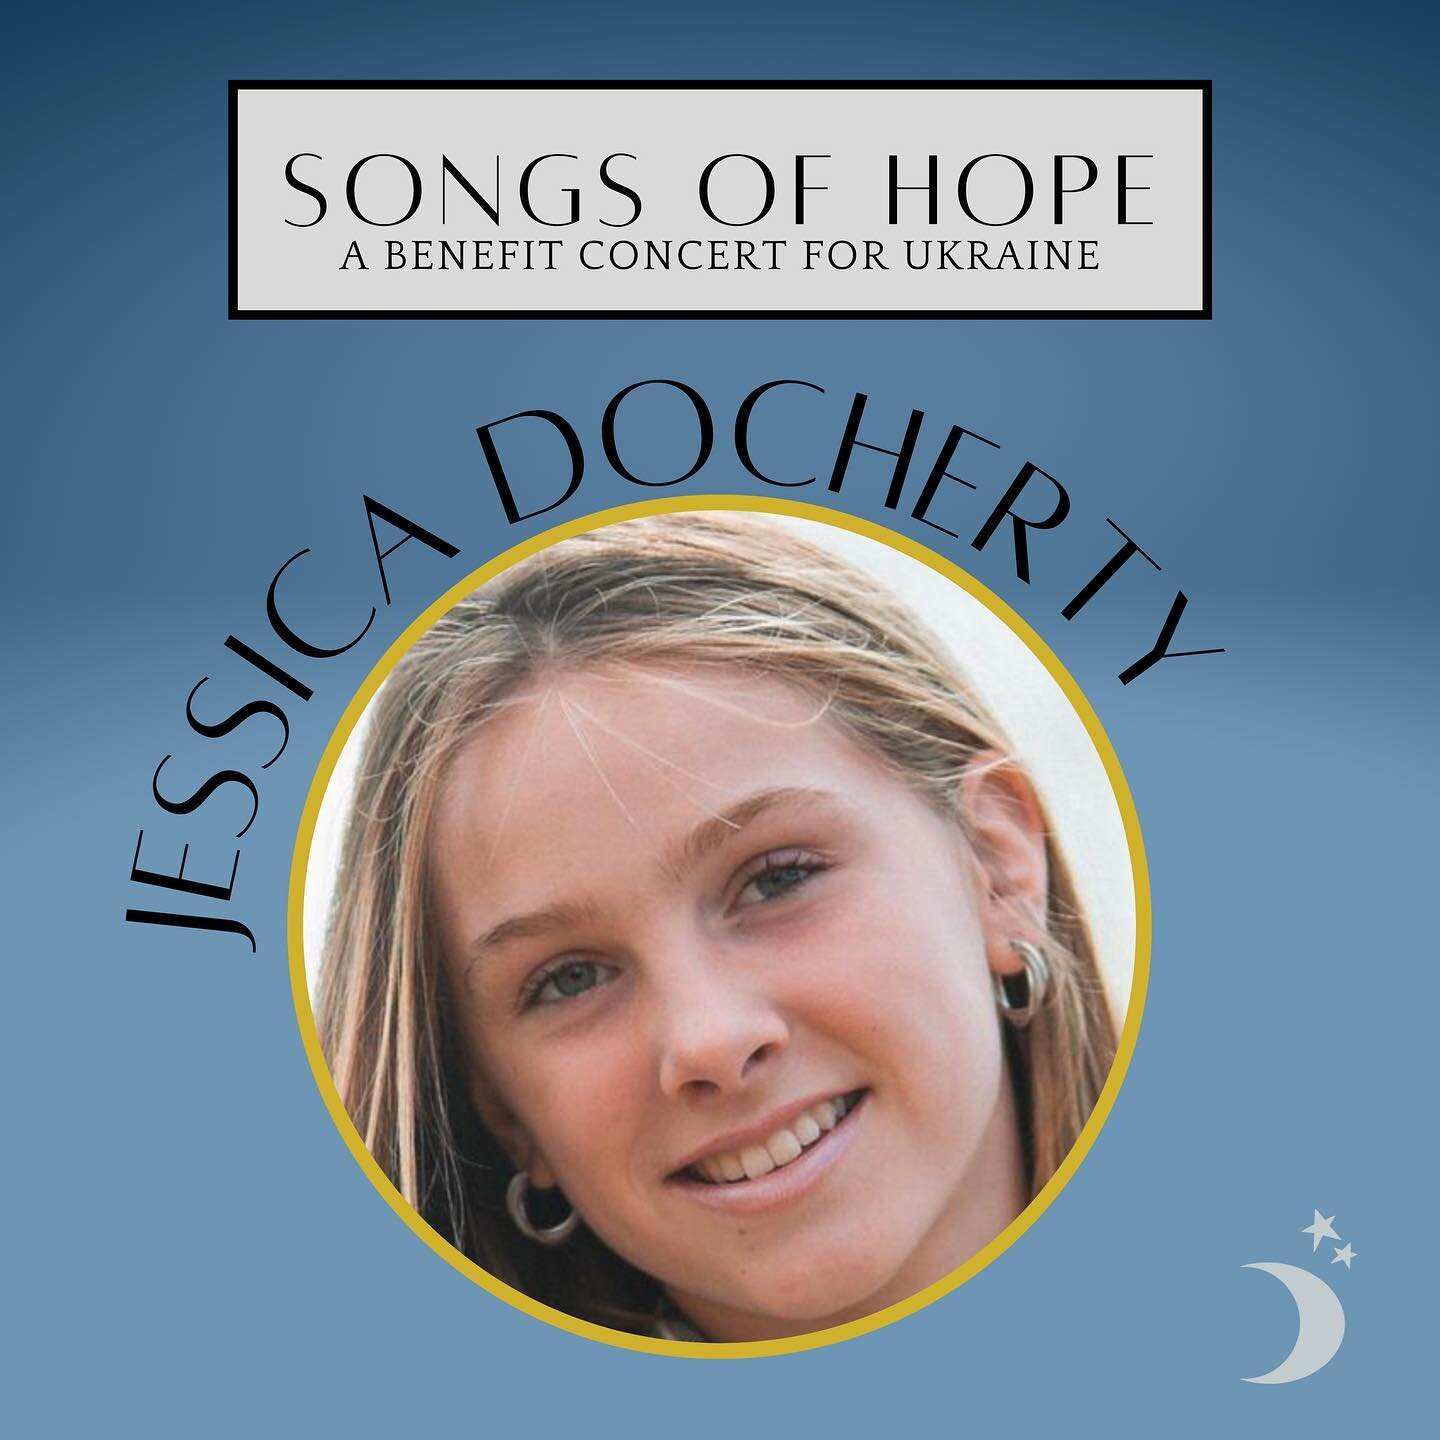 Our last cast member is Jessica Docherty!

Jessica has been singing her whole life, and has held roles such as Tinkerbell, Cinderella, and Lies Von Trapp in her Youth theatre school productions. She is currently enrolled in the Performing Arts Progra